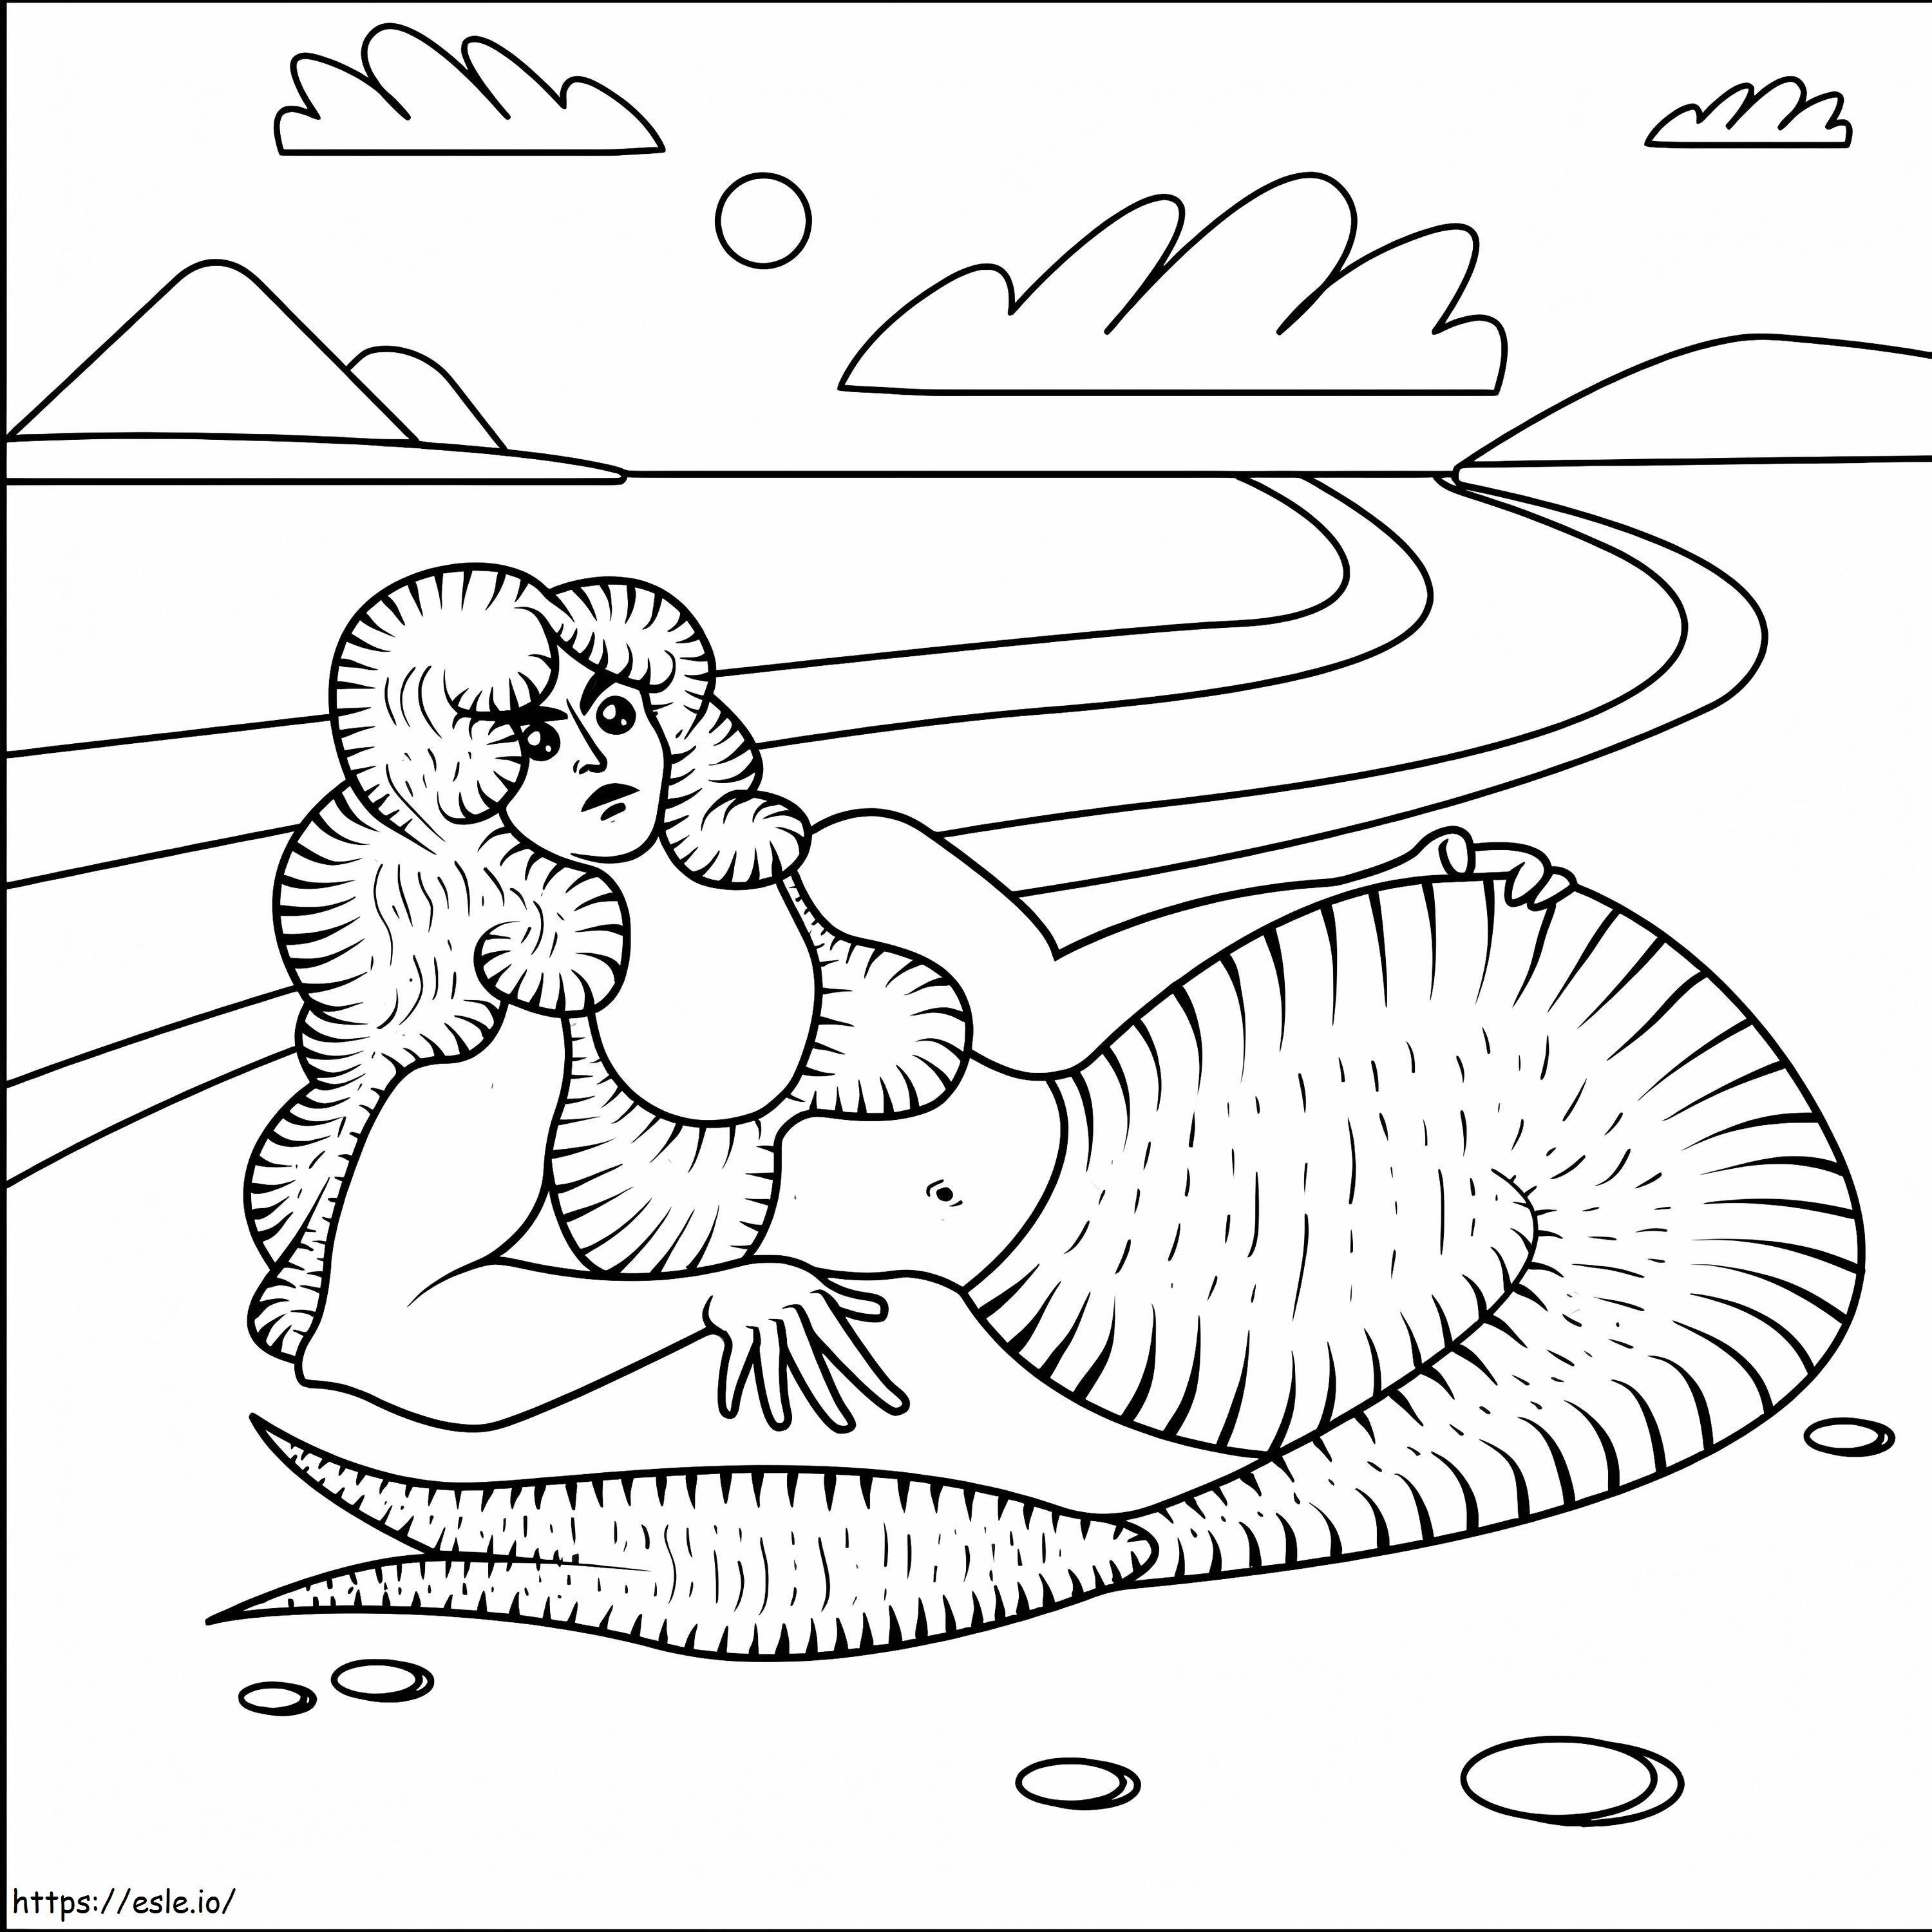 Mermaid On The Beach coloring page